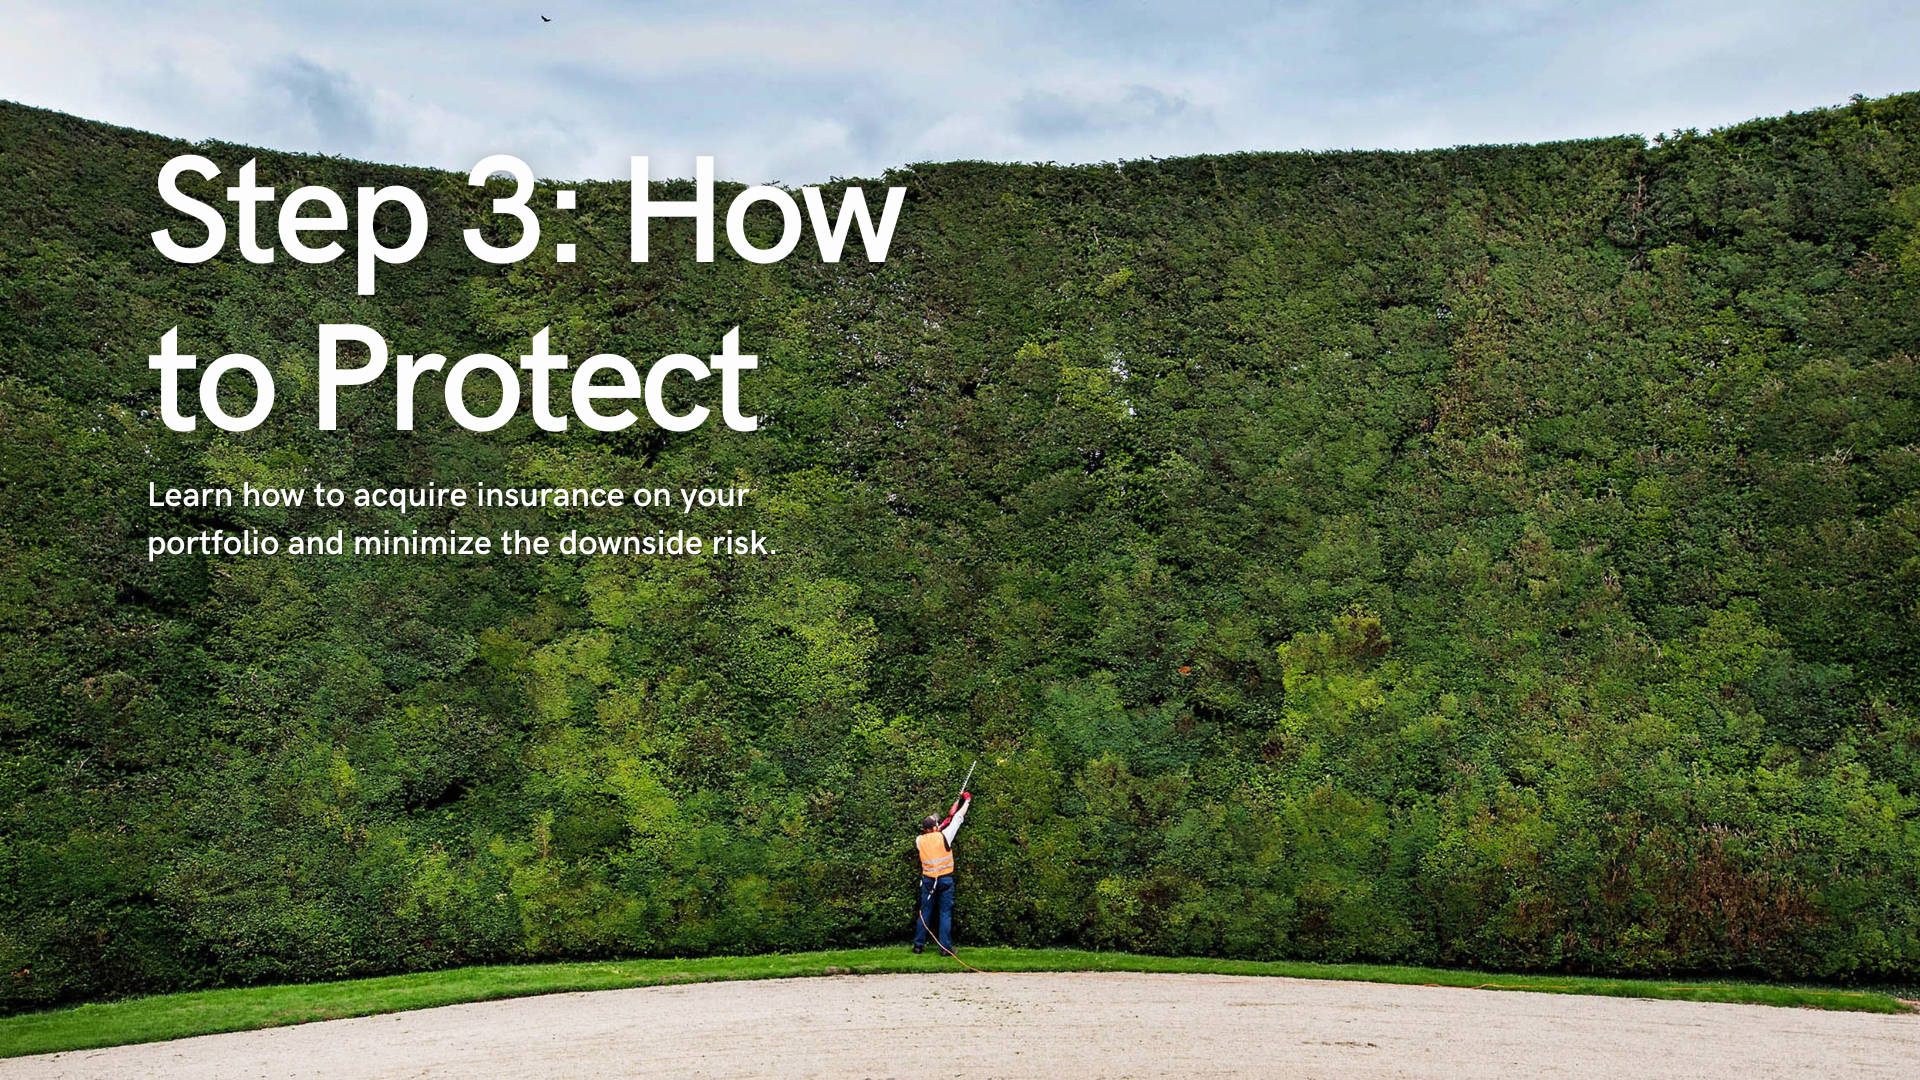 Step 3: How to Protect. Learn how to acquire insurance on your portfolio and minimize the downside risk.